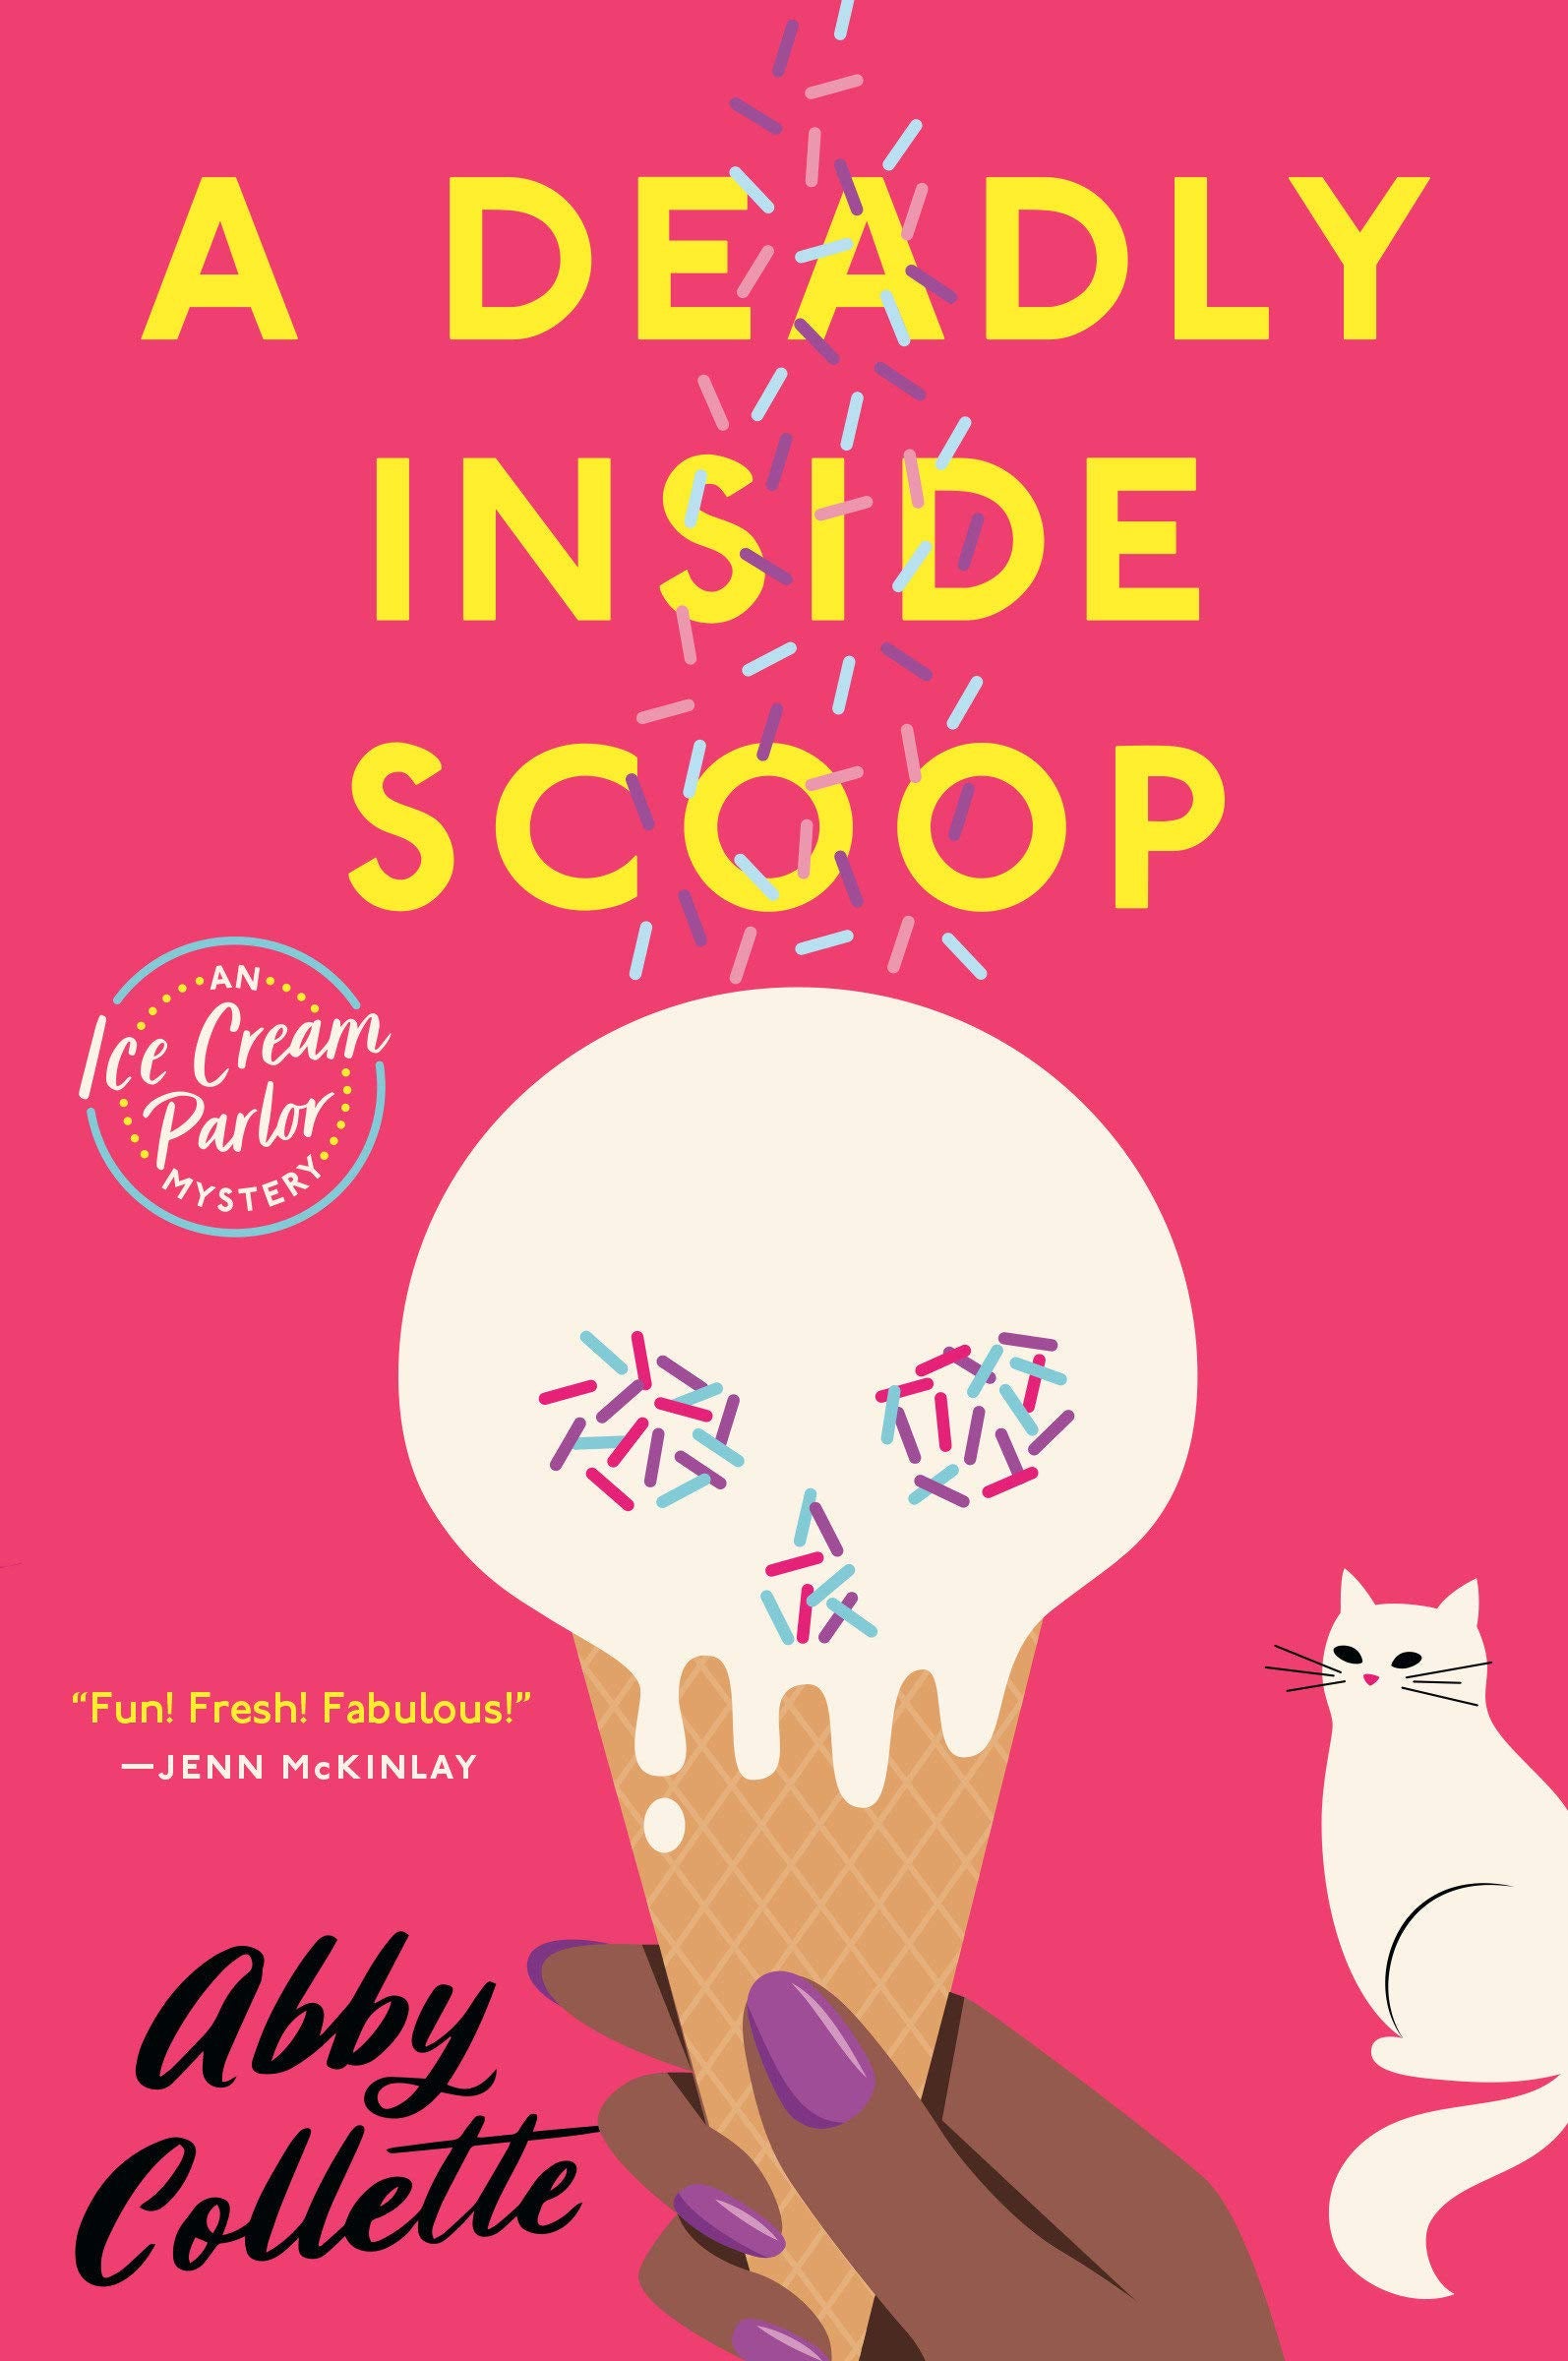 A Deadly Inside Scoop Paperback by Abby Collette